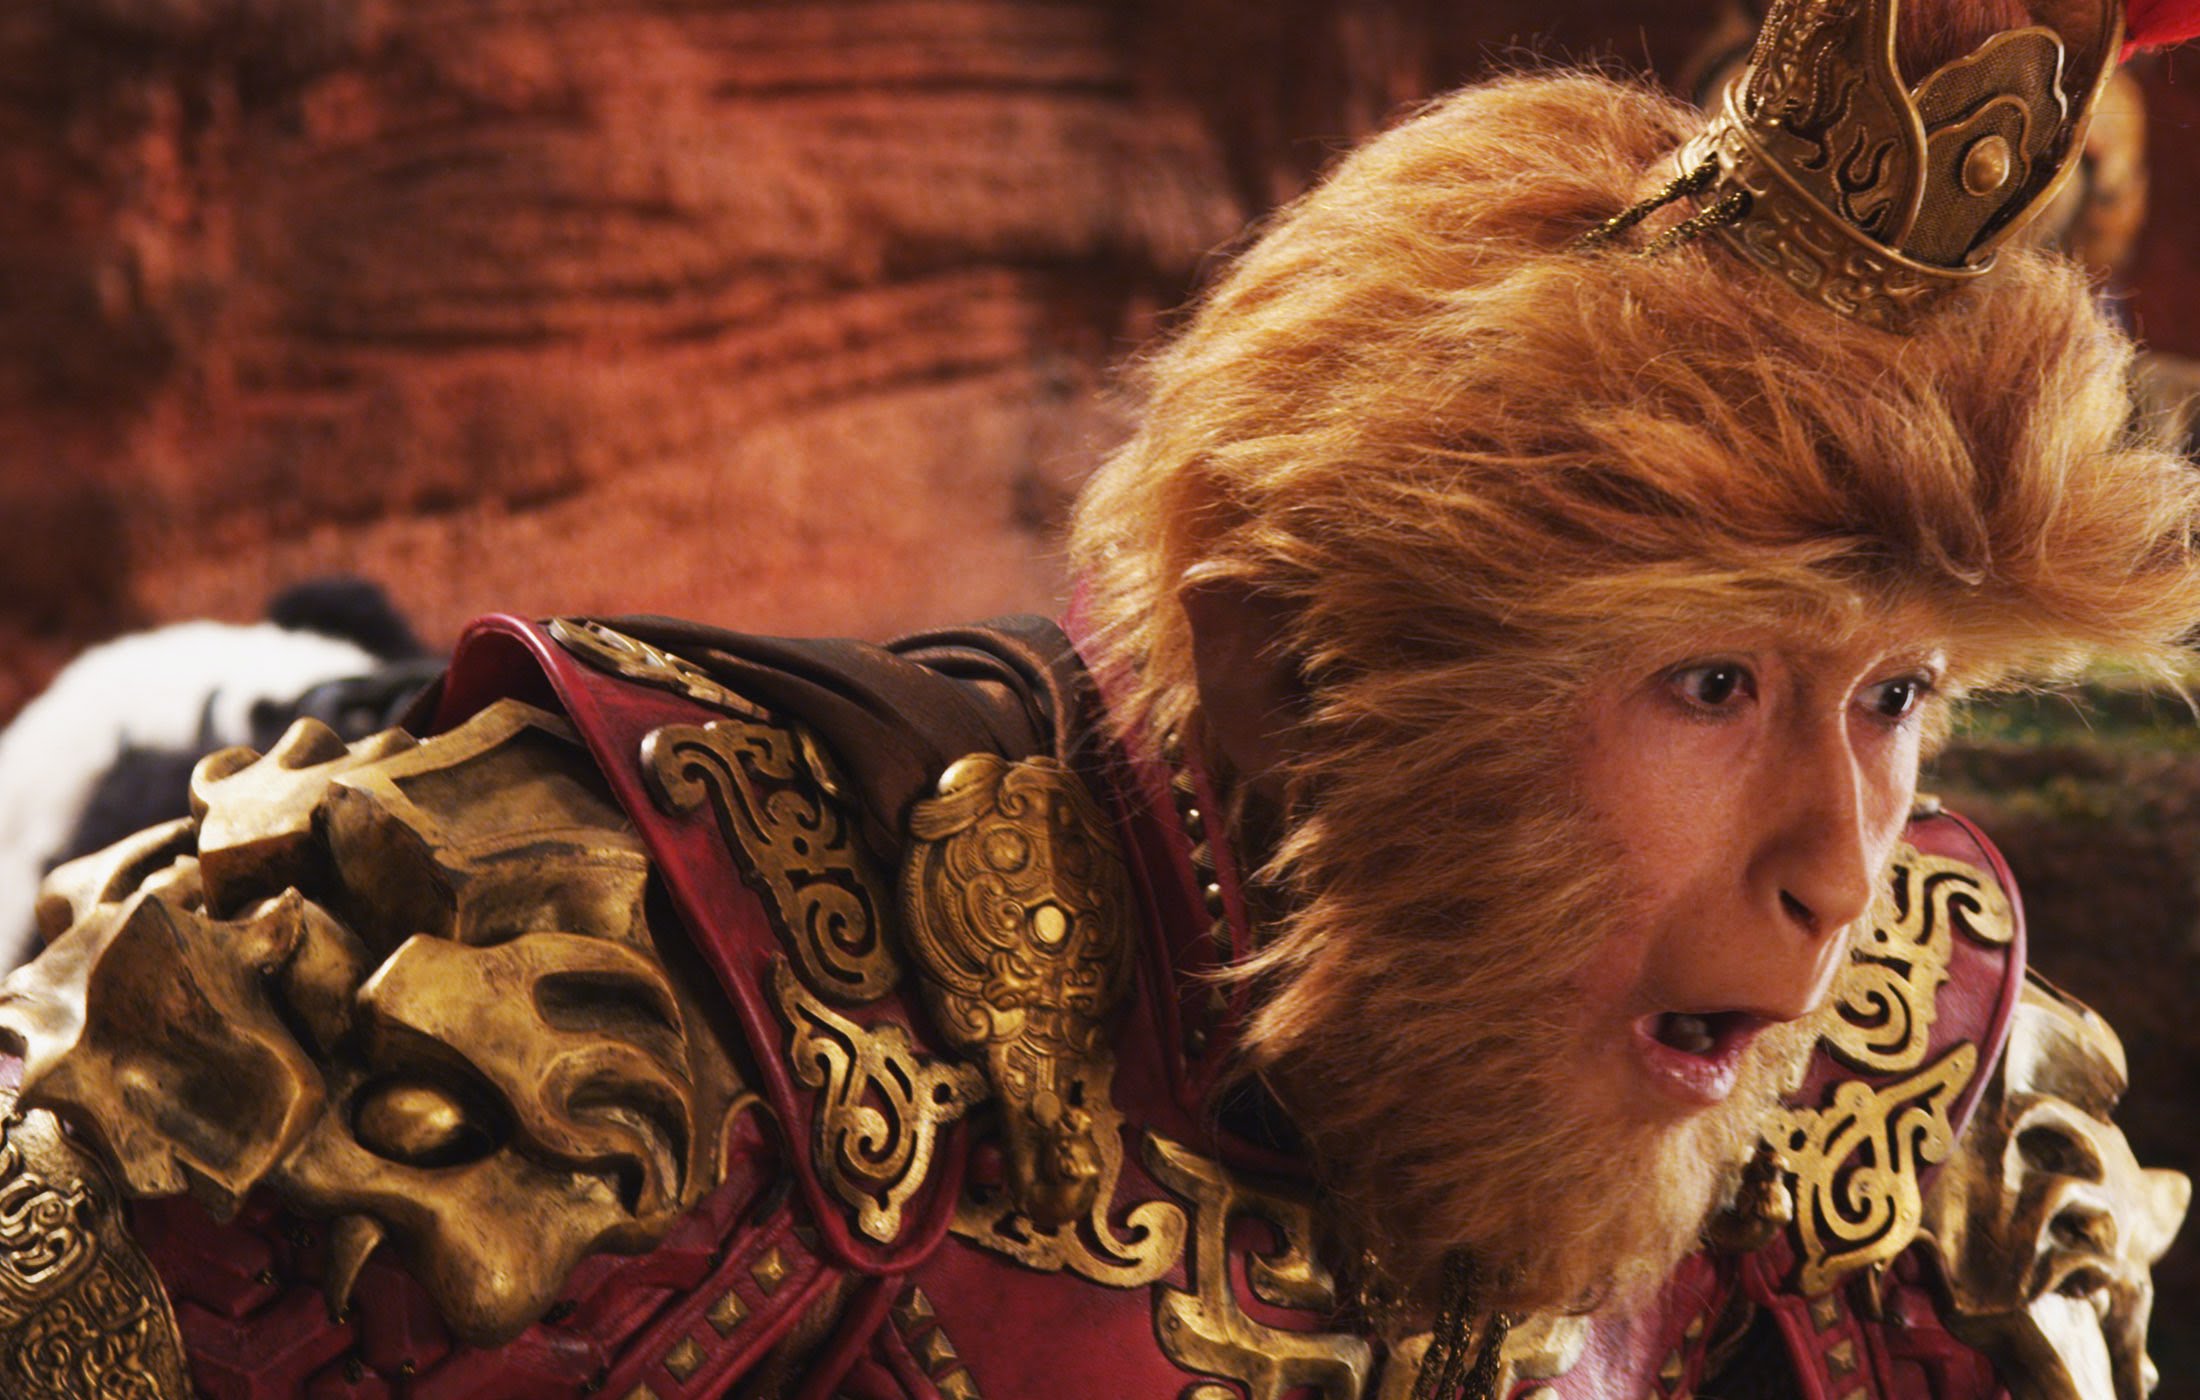 the monkey king movie review